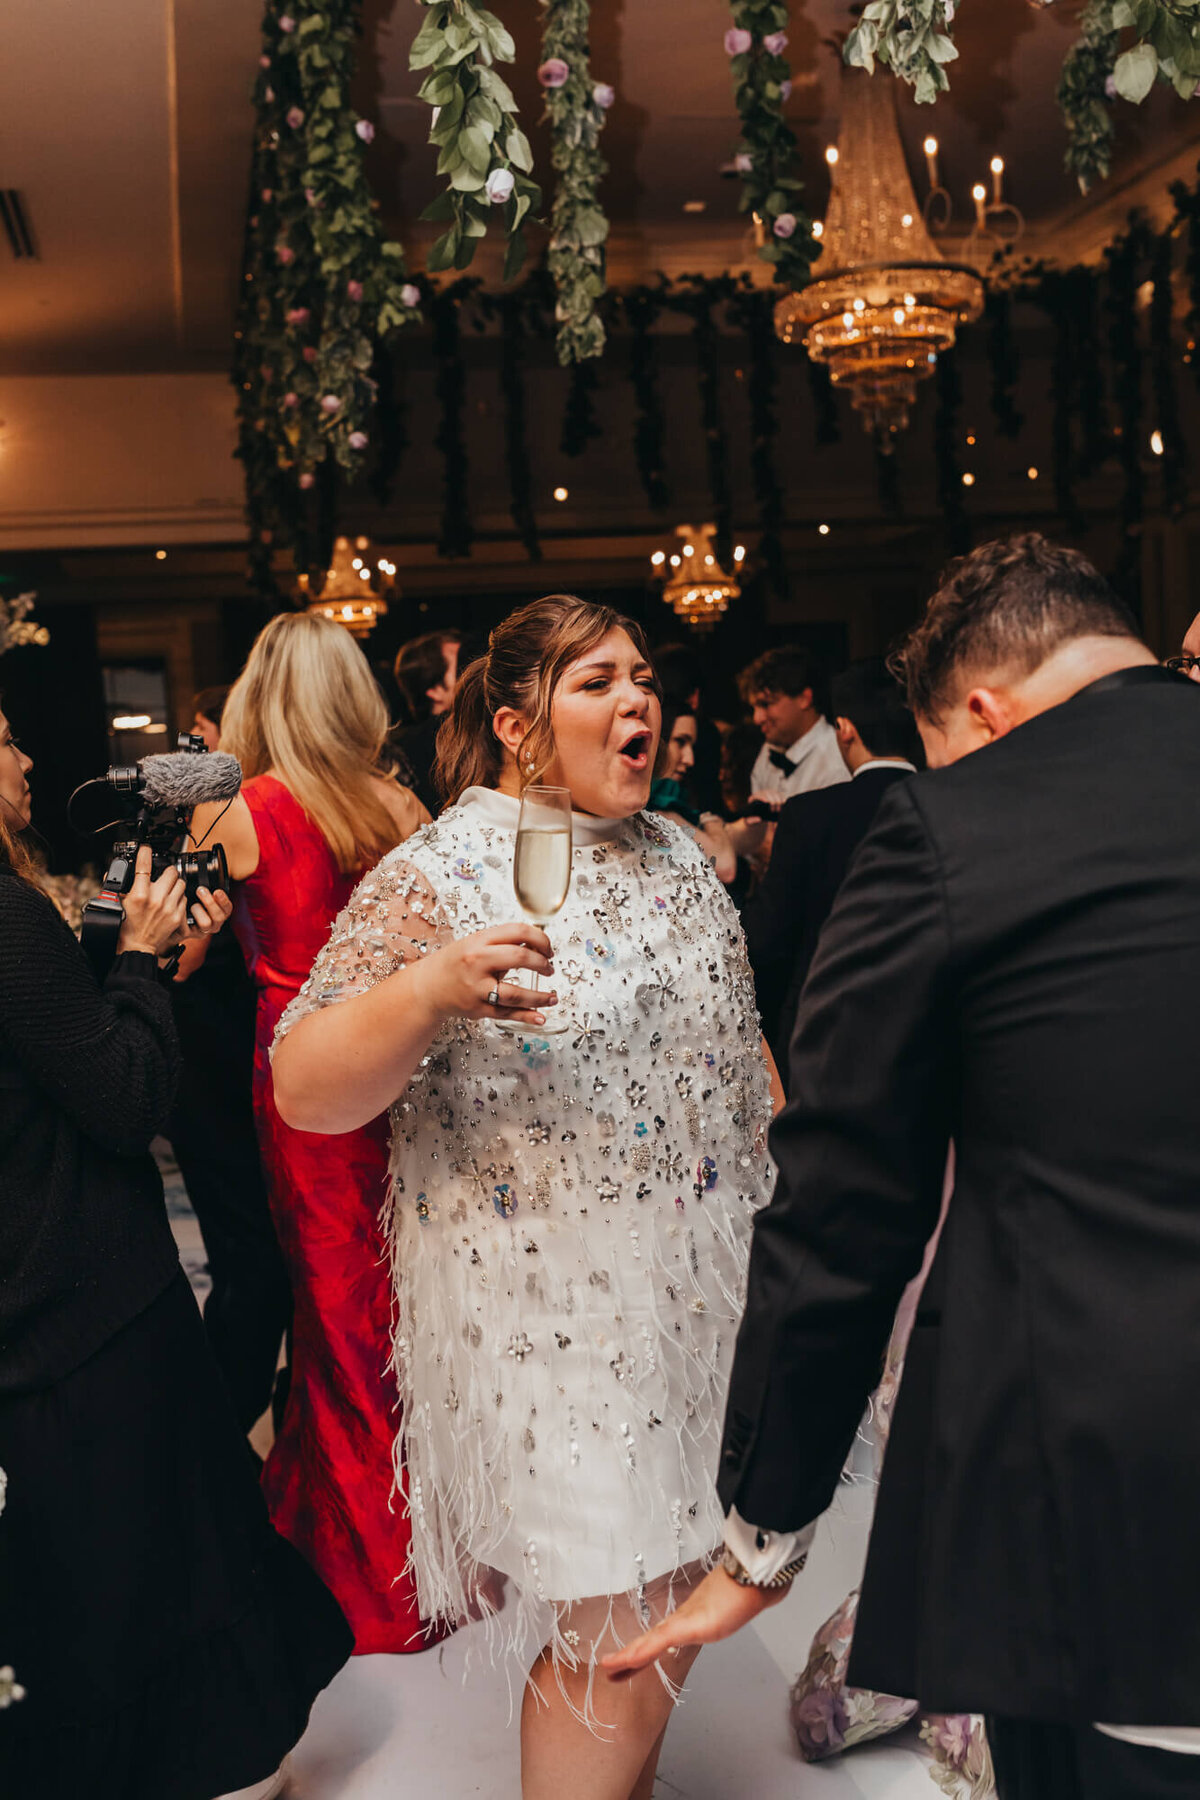 brides hold champagne glass while dancing with her husband at the party.